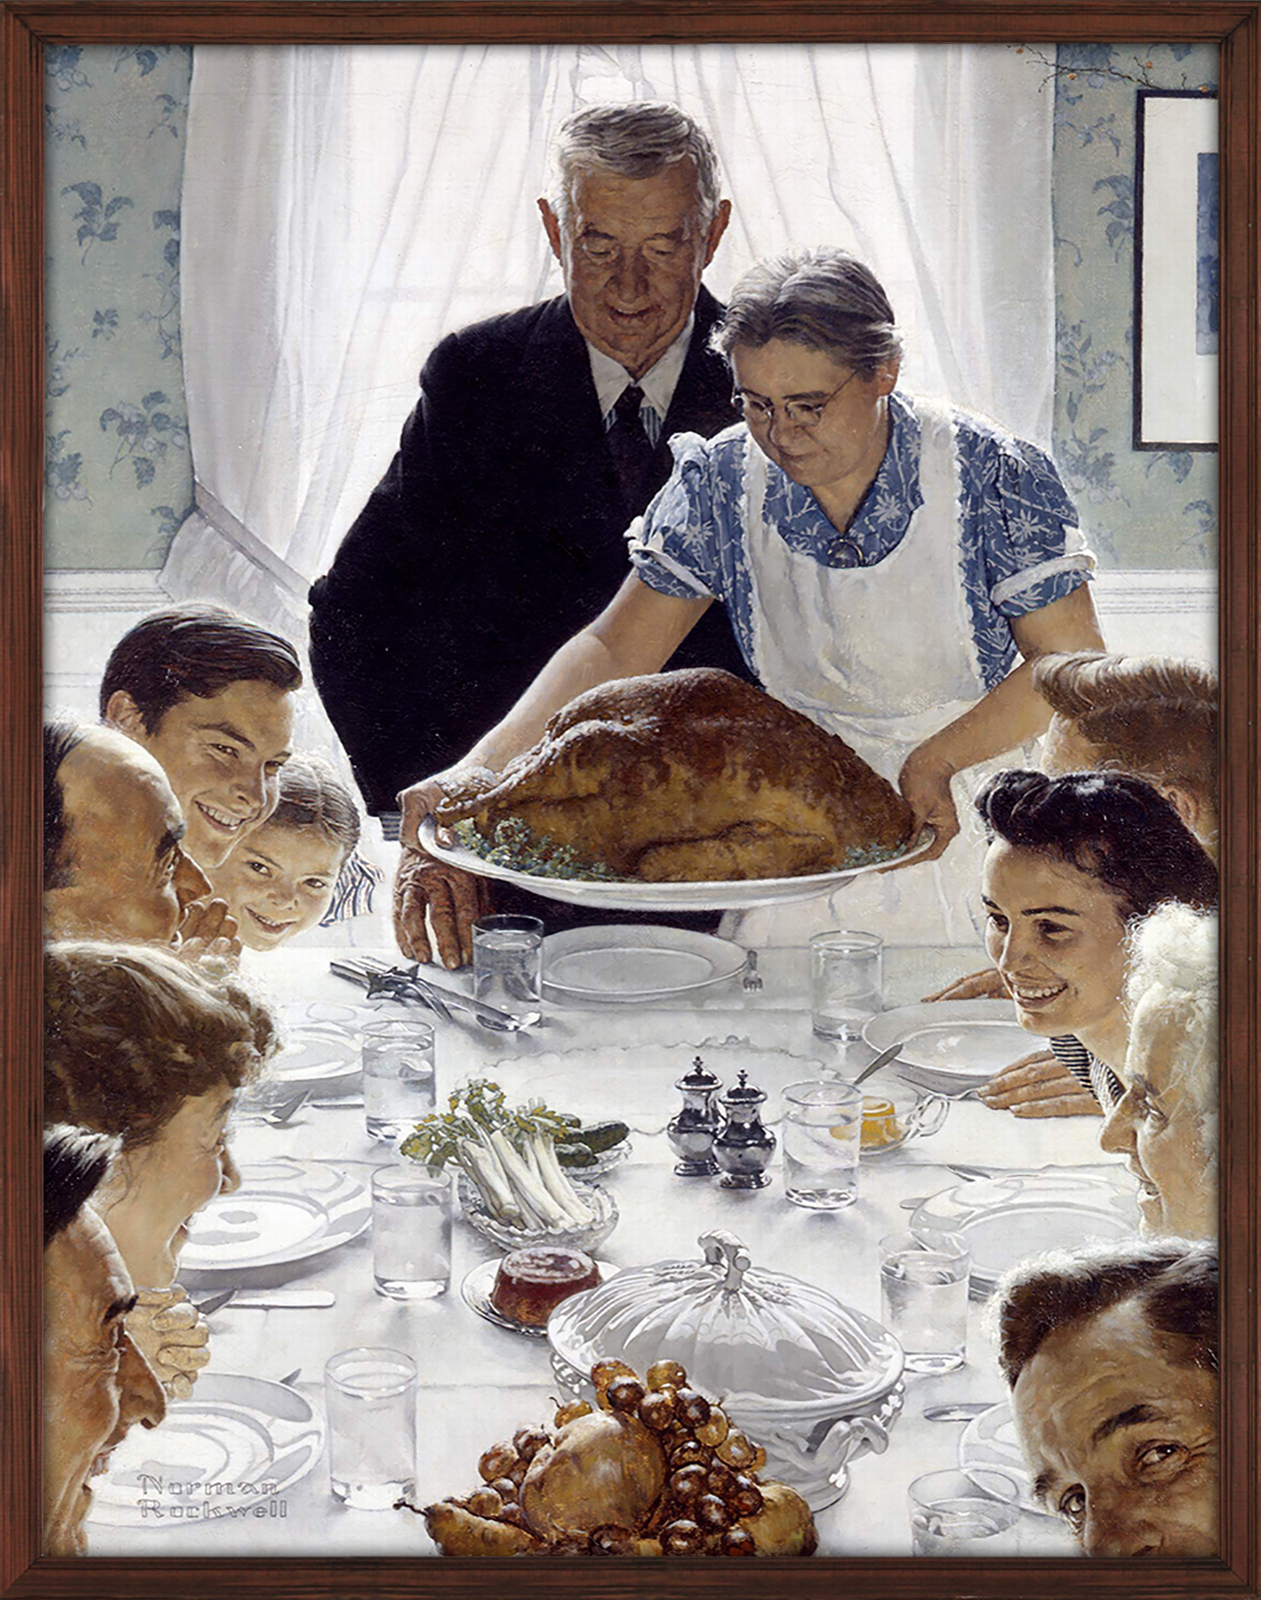 Norman Rockwell illustration of a Thanksgiving dinner